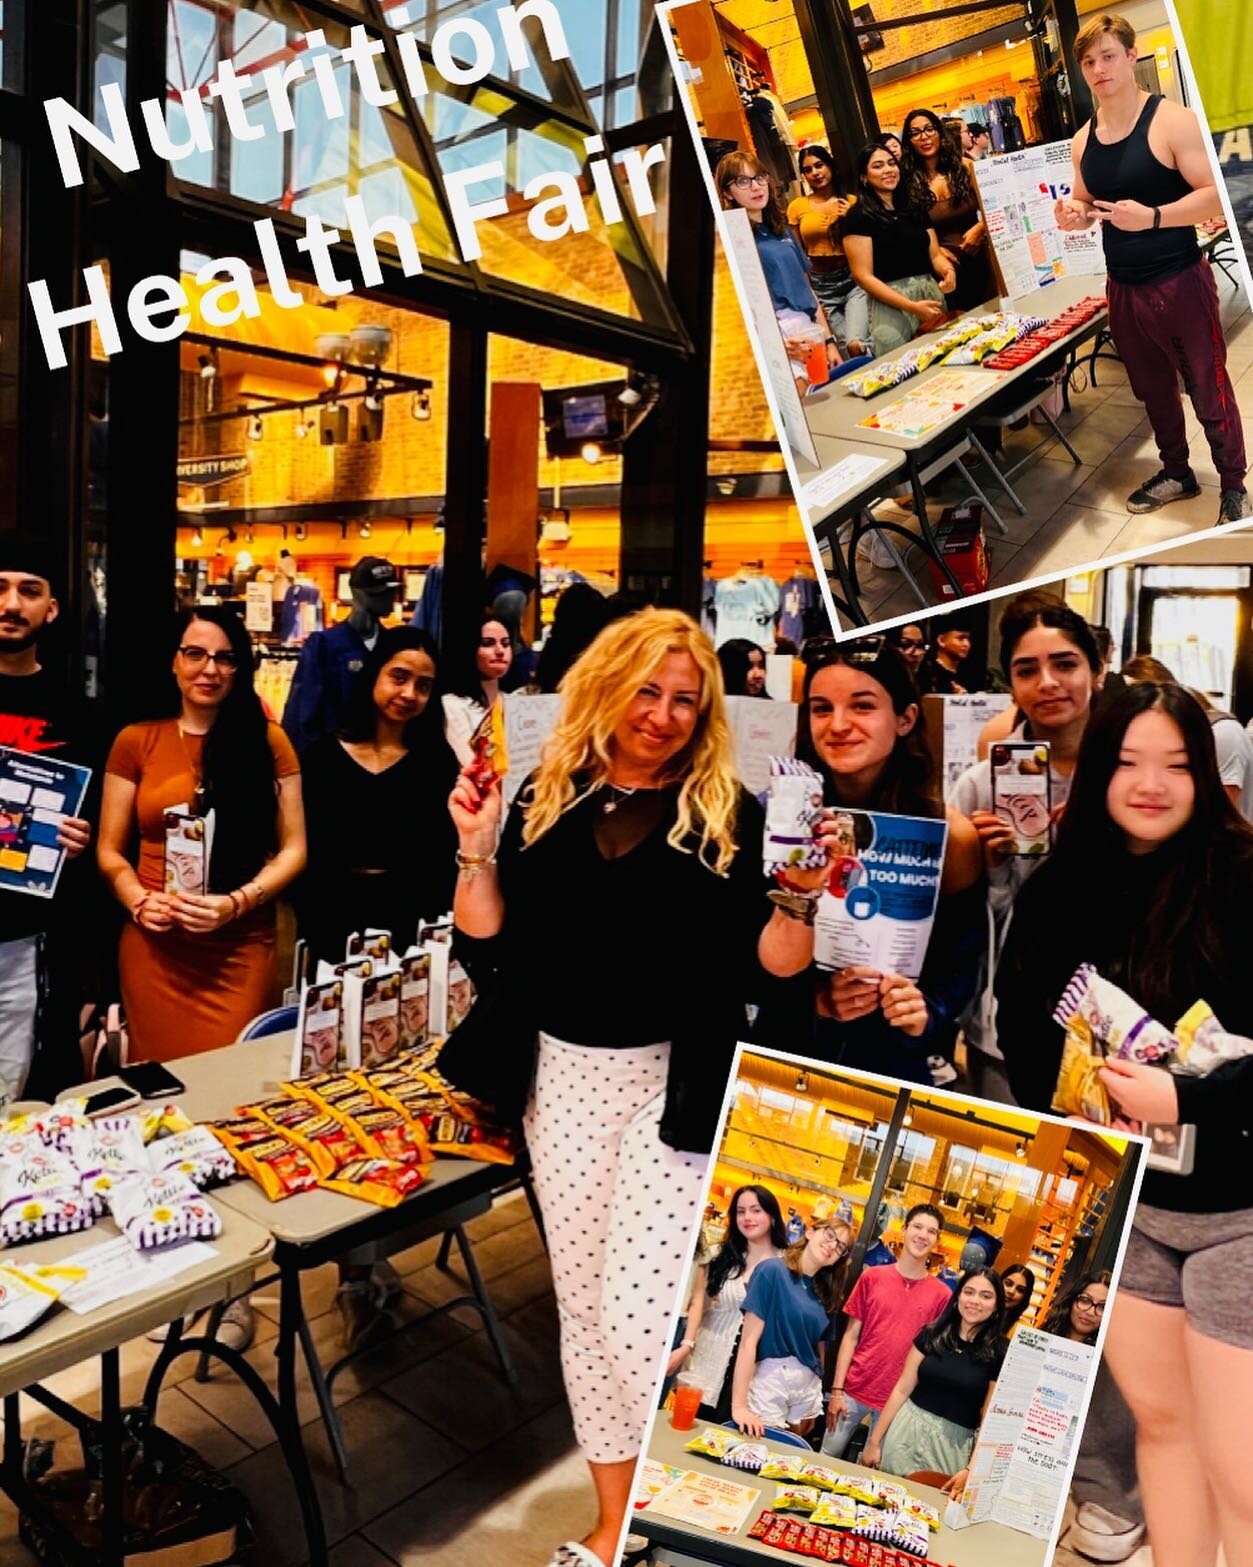 Happy Public Health Week! 🎉 I love volunteering for a greater good- how about you?
🎉Our goal in Public Health is to prevent diseases by promoting healthy behaviors to keep ourselves, our families and communities safe and healthy. 
🎉There are plent